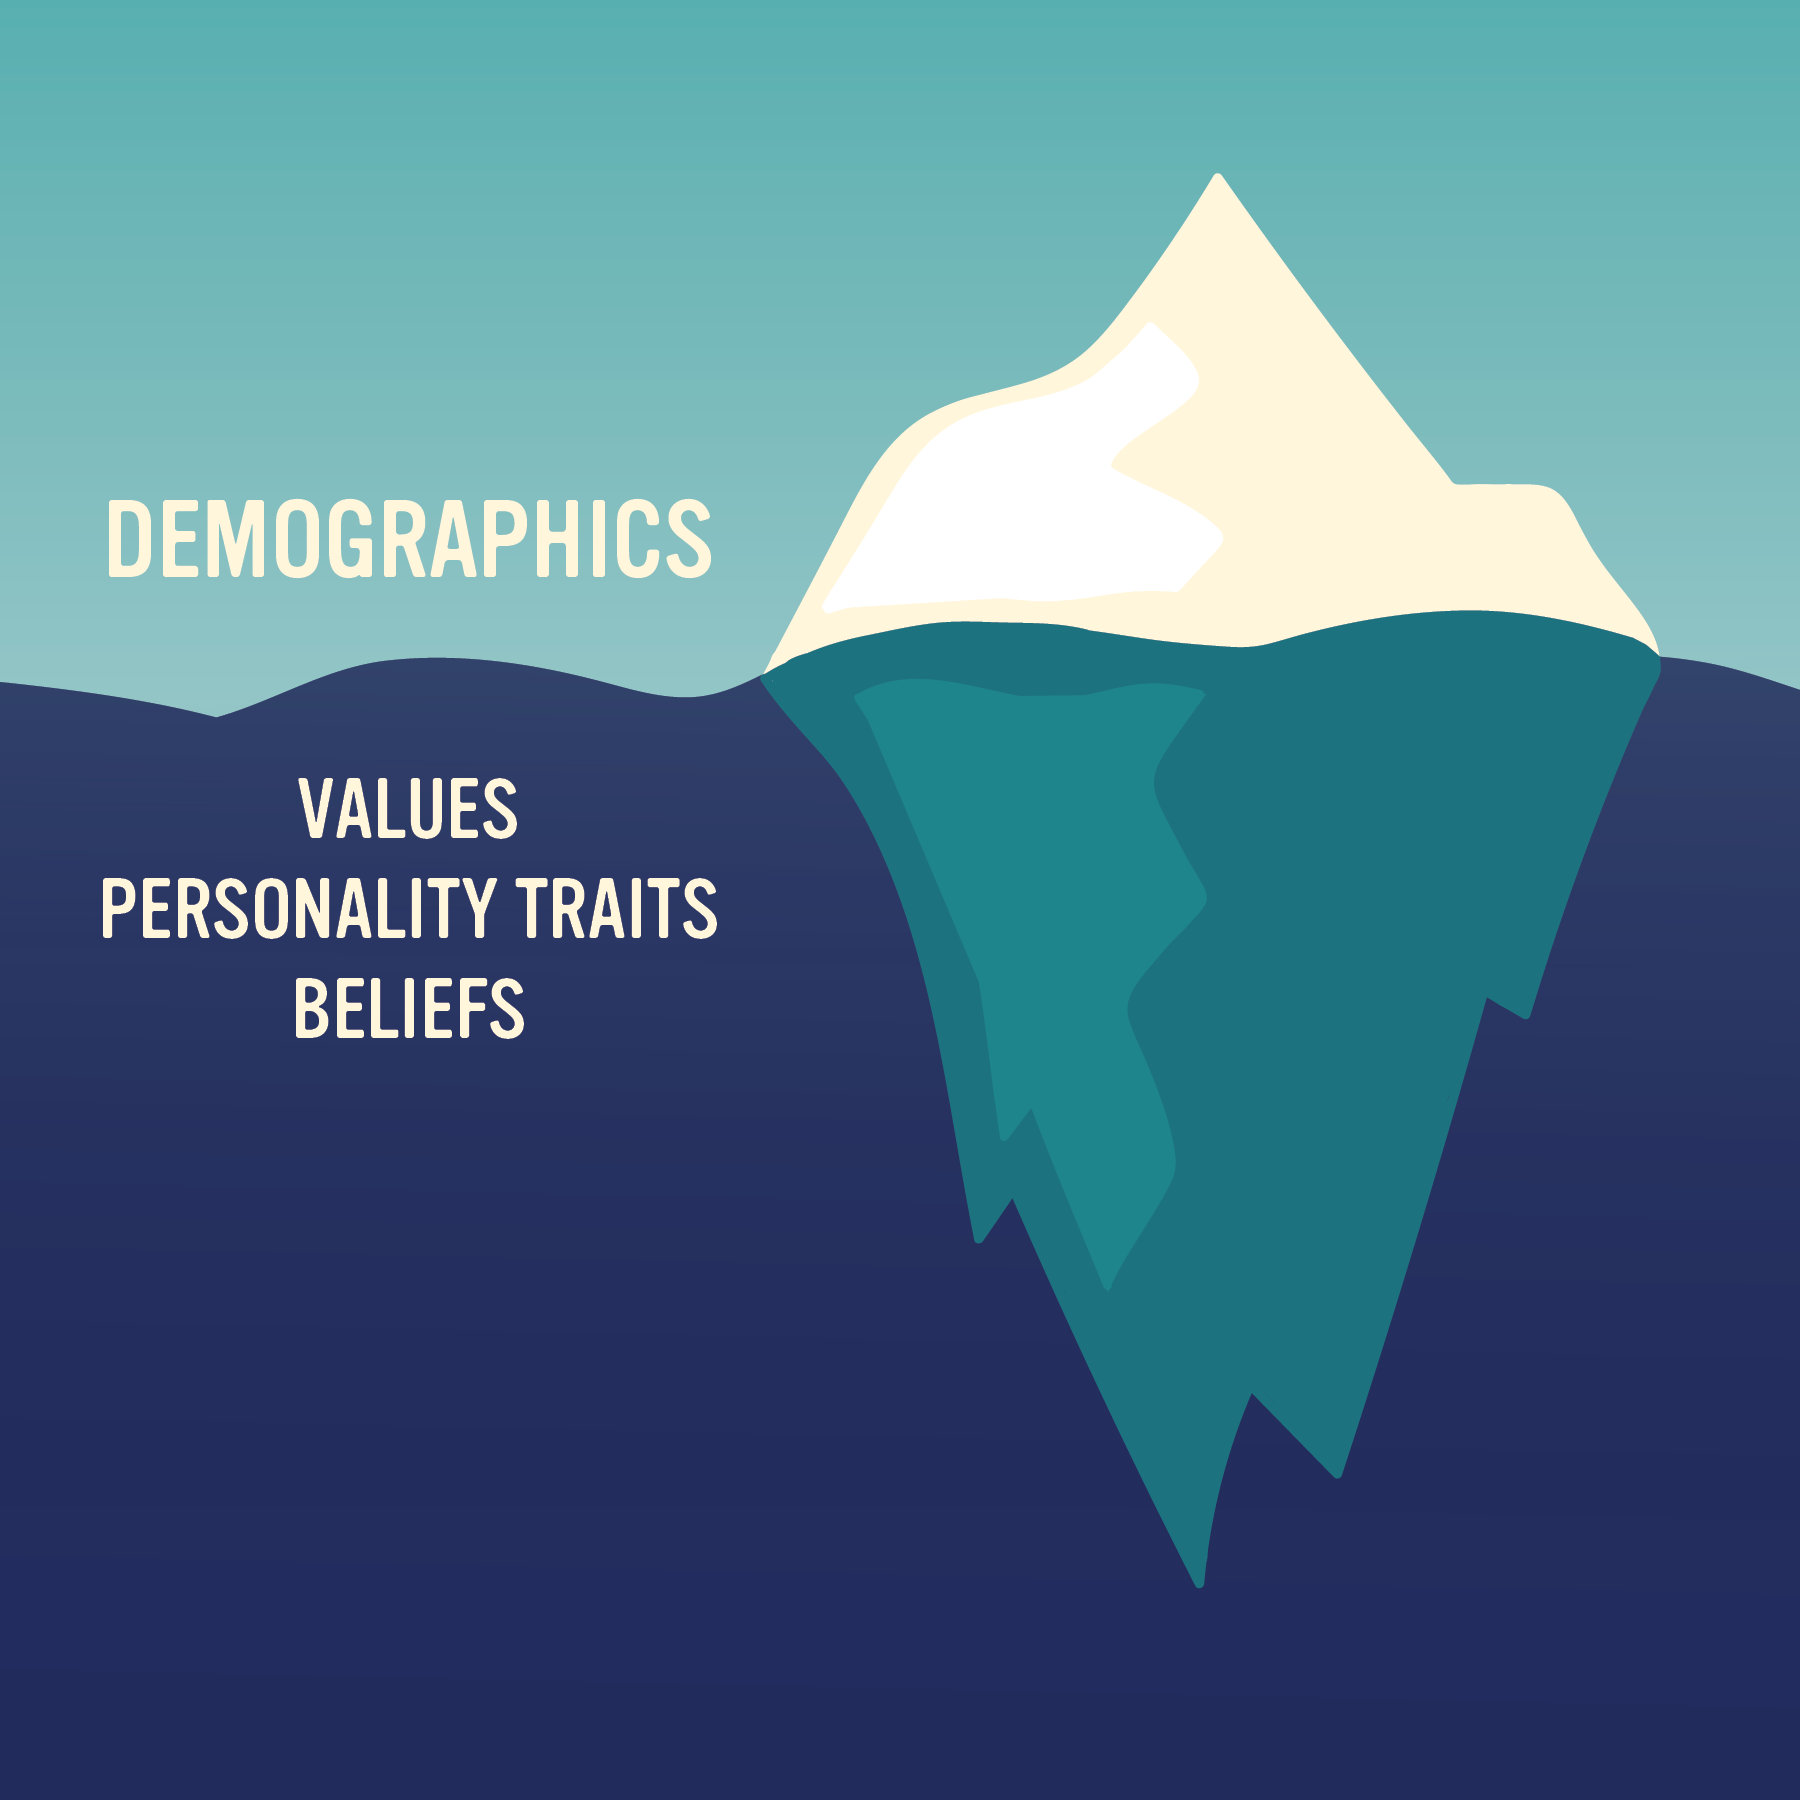 Image of an iceberg on a blue background with the text "Demographics" above the water line and the text "Values, Personality Traits, Beliefs" below the water line.